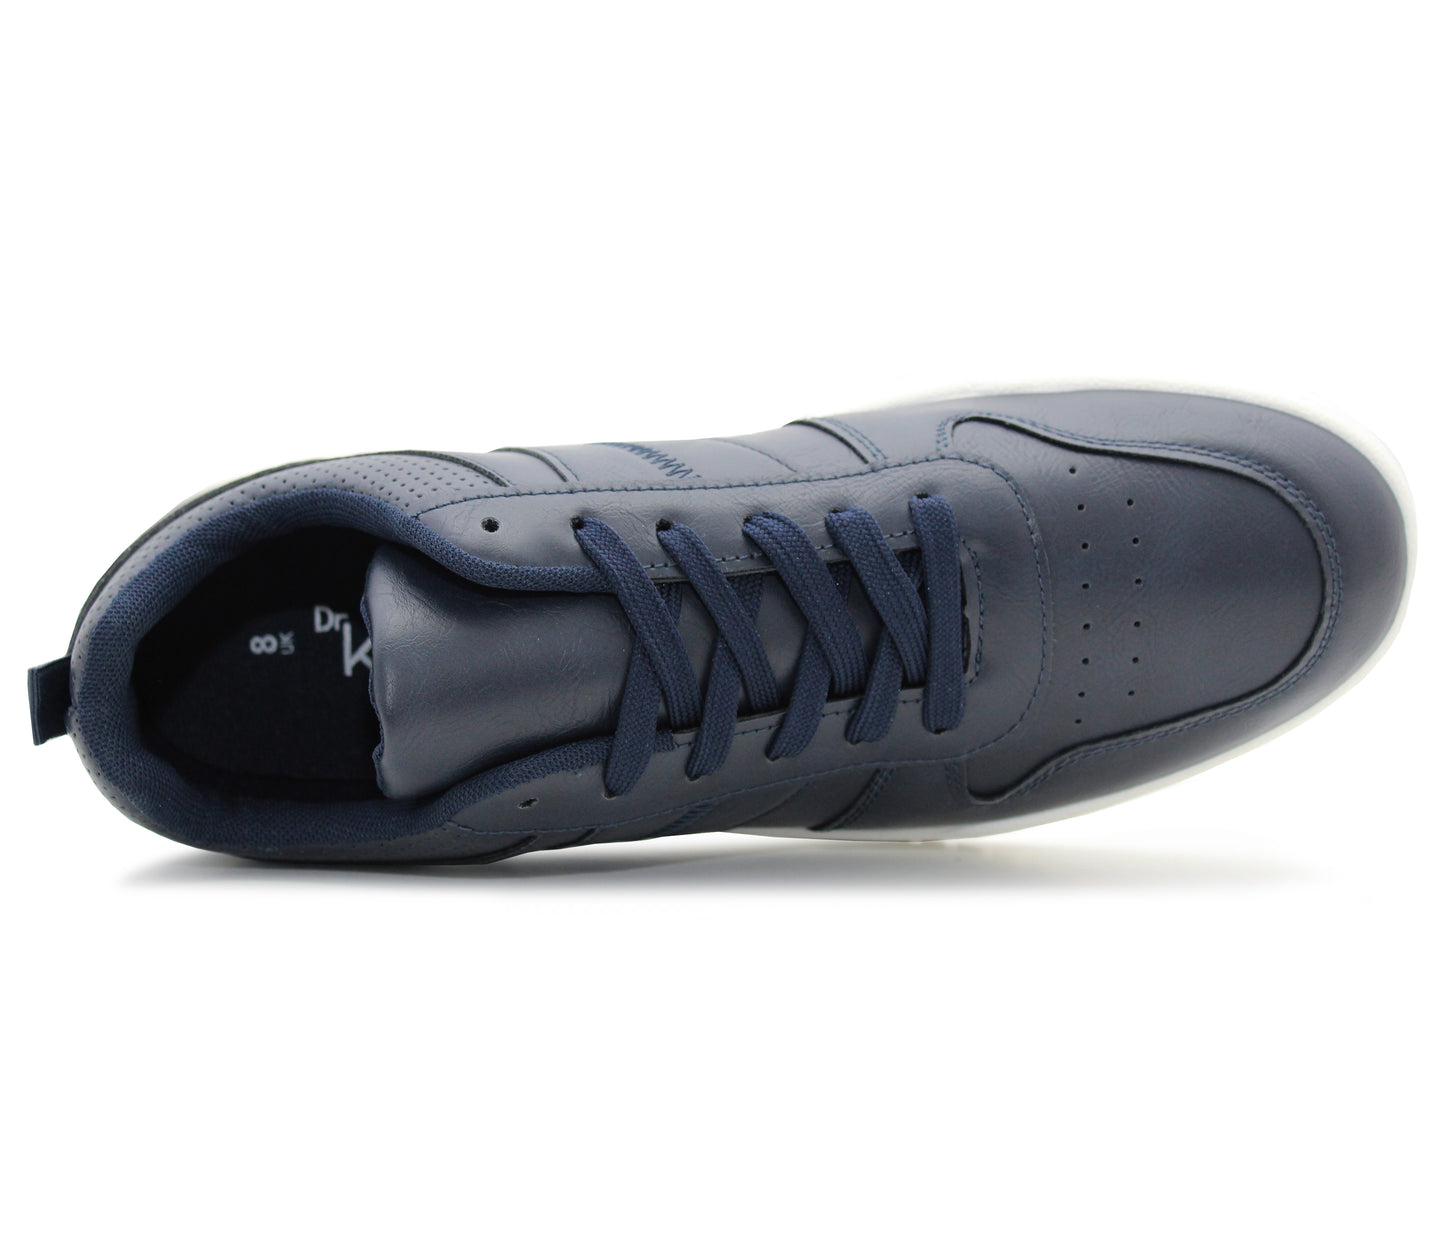 Mens Lace Up Trainers Casual Smart Flat Navy Synthetic Leather Fashion Sports Sneakers